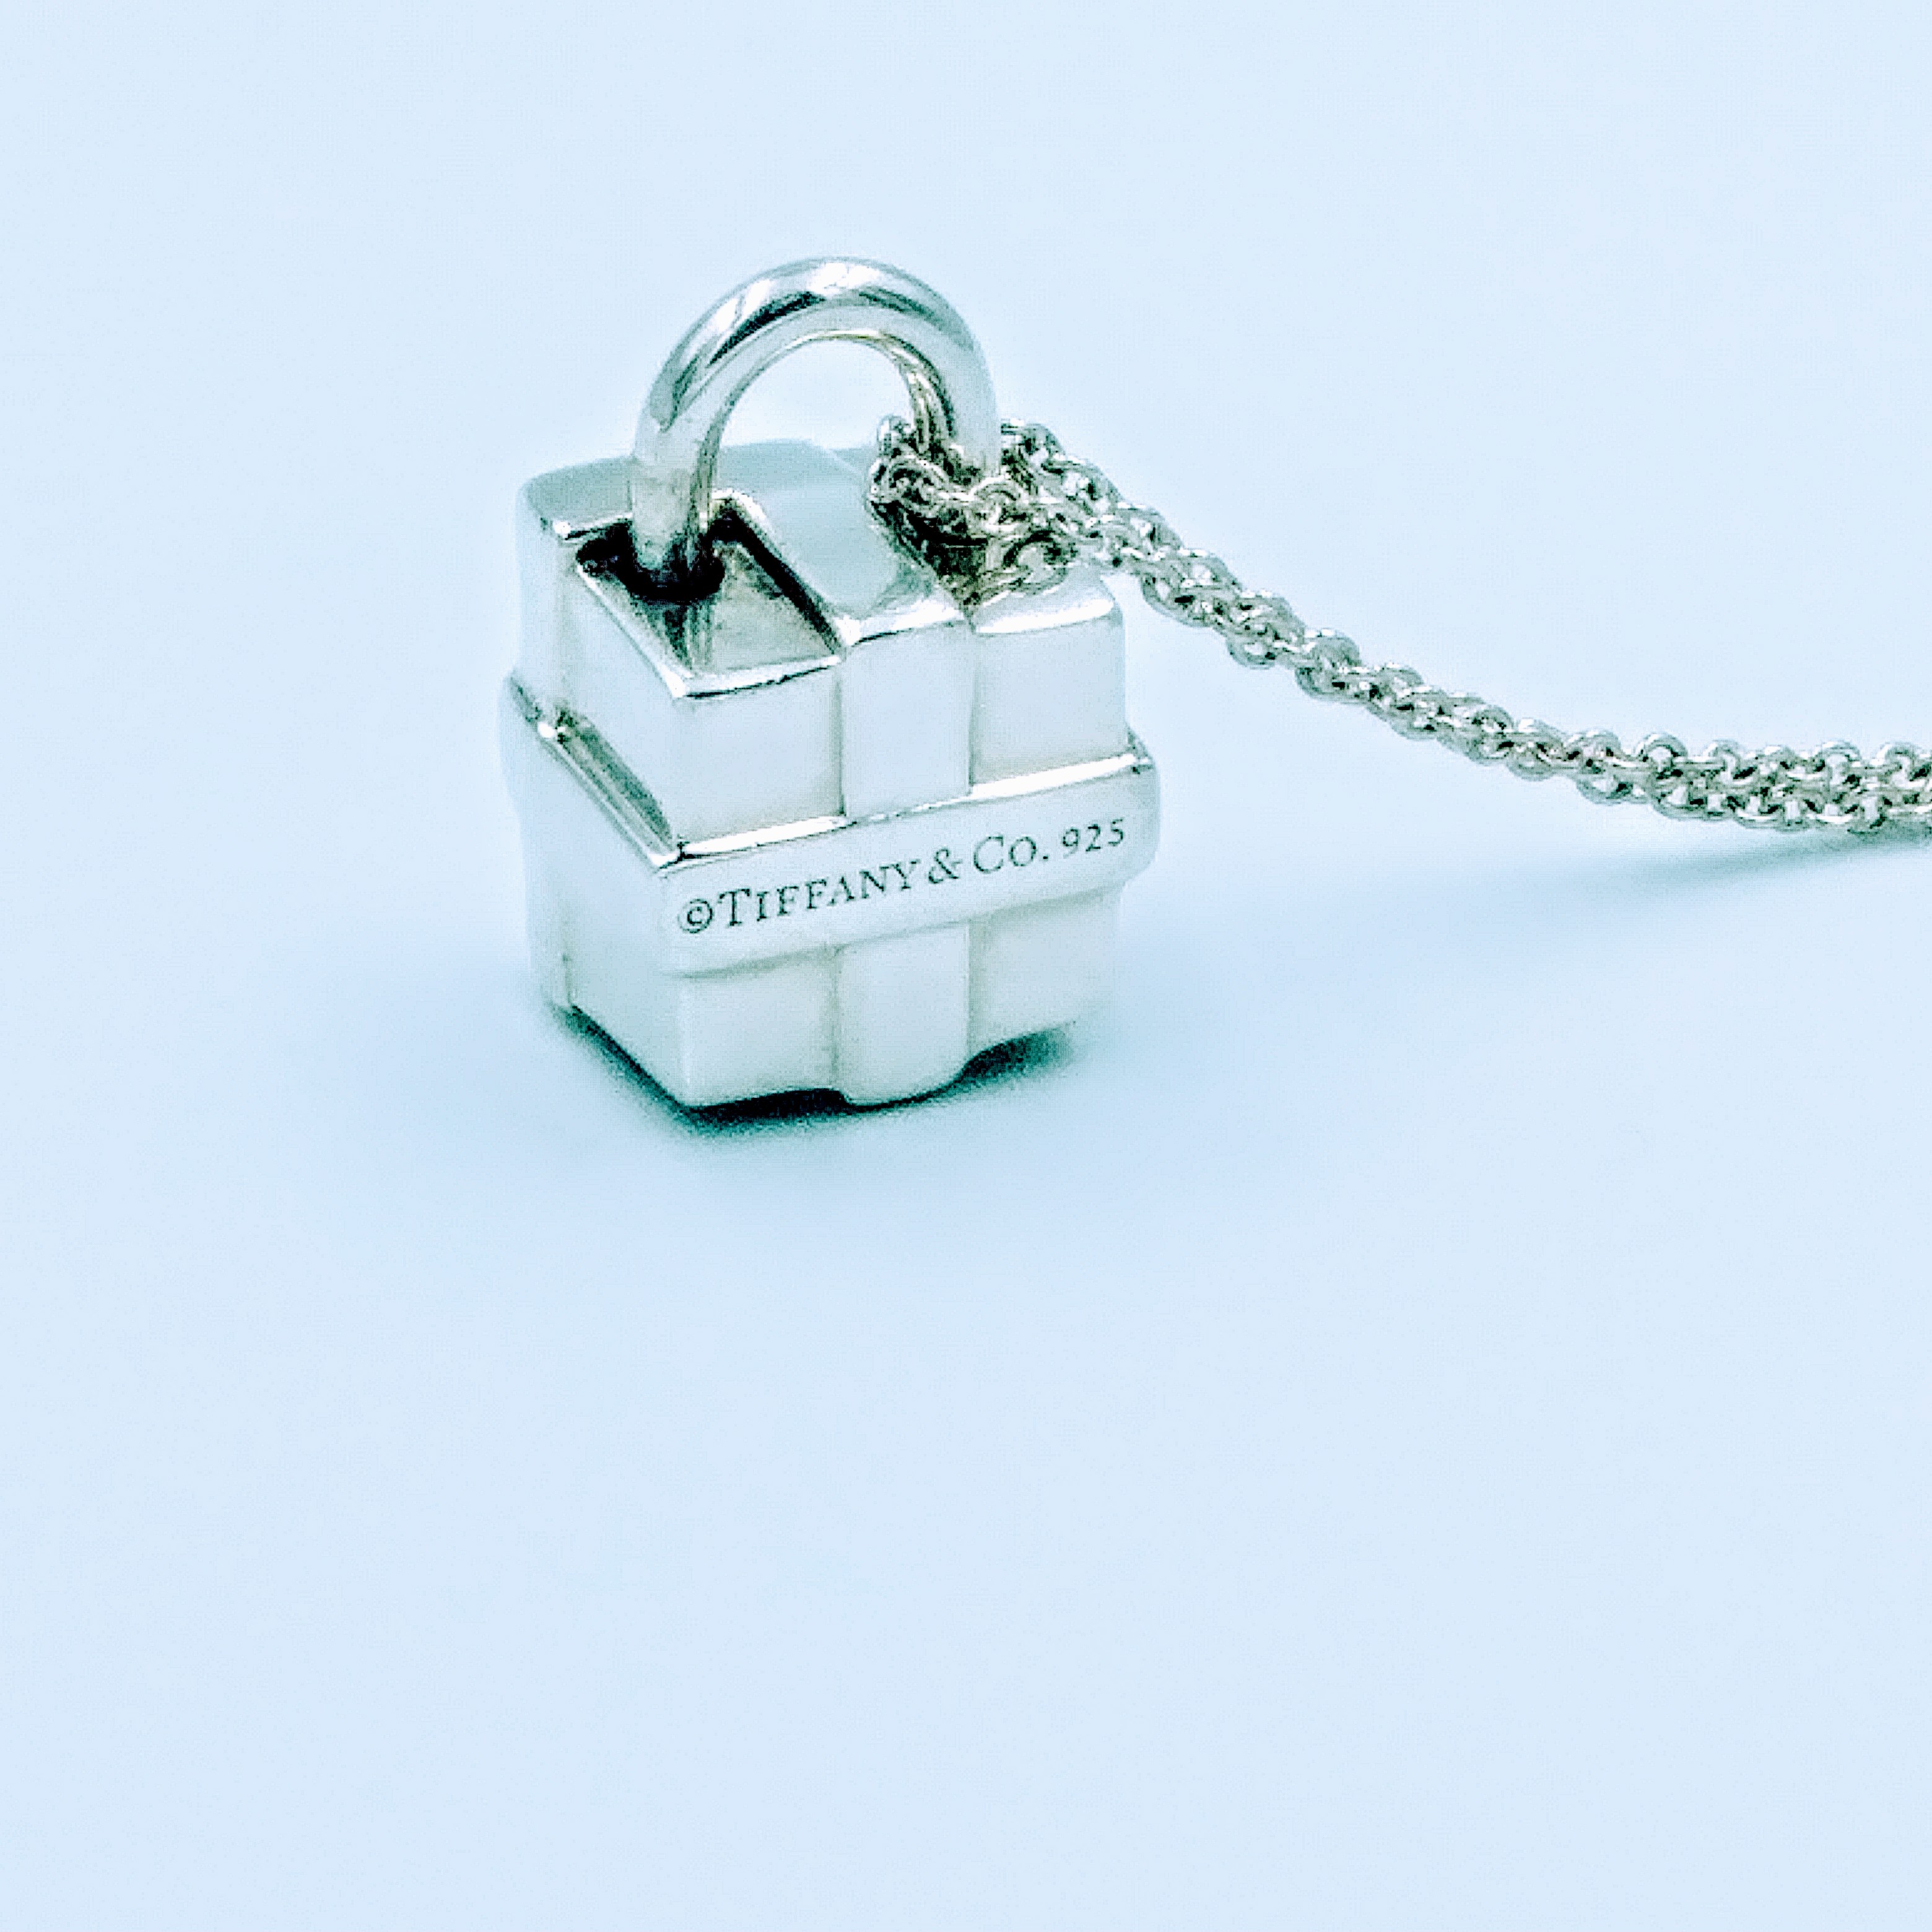 Tiffany & Co Silver Shopping Bag Charm Pendant for Necklace 